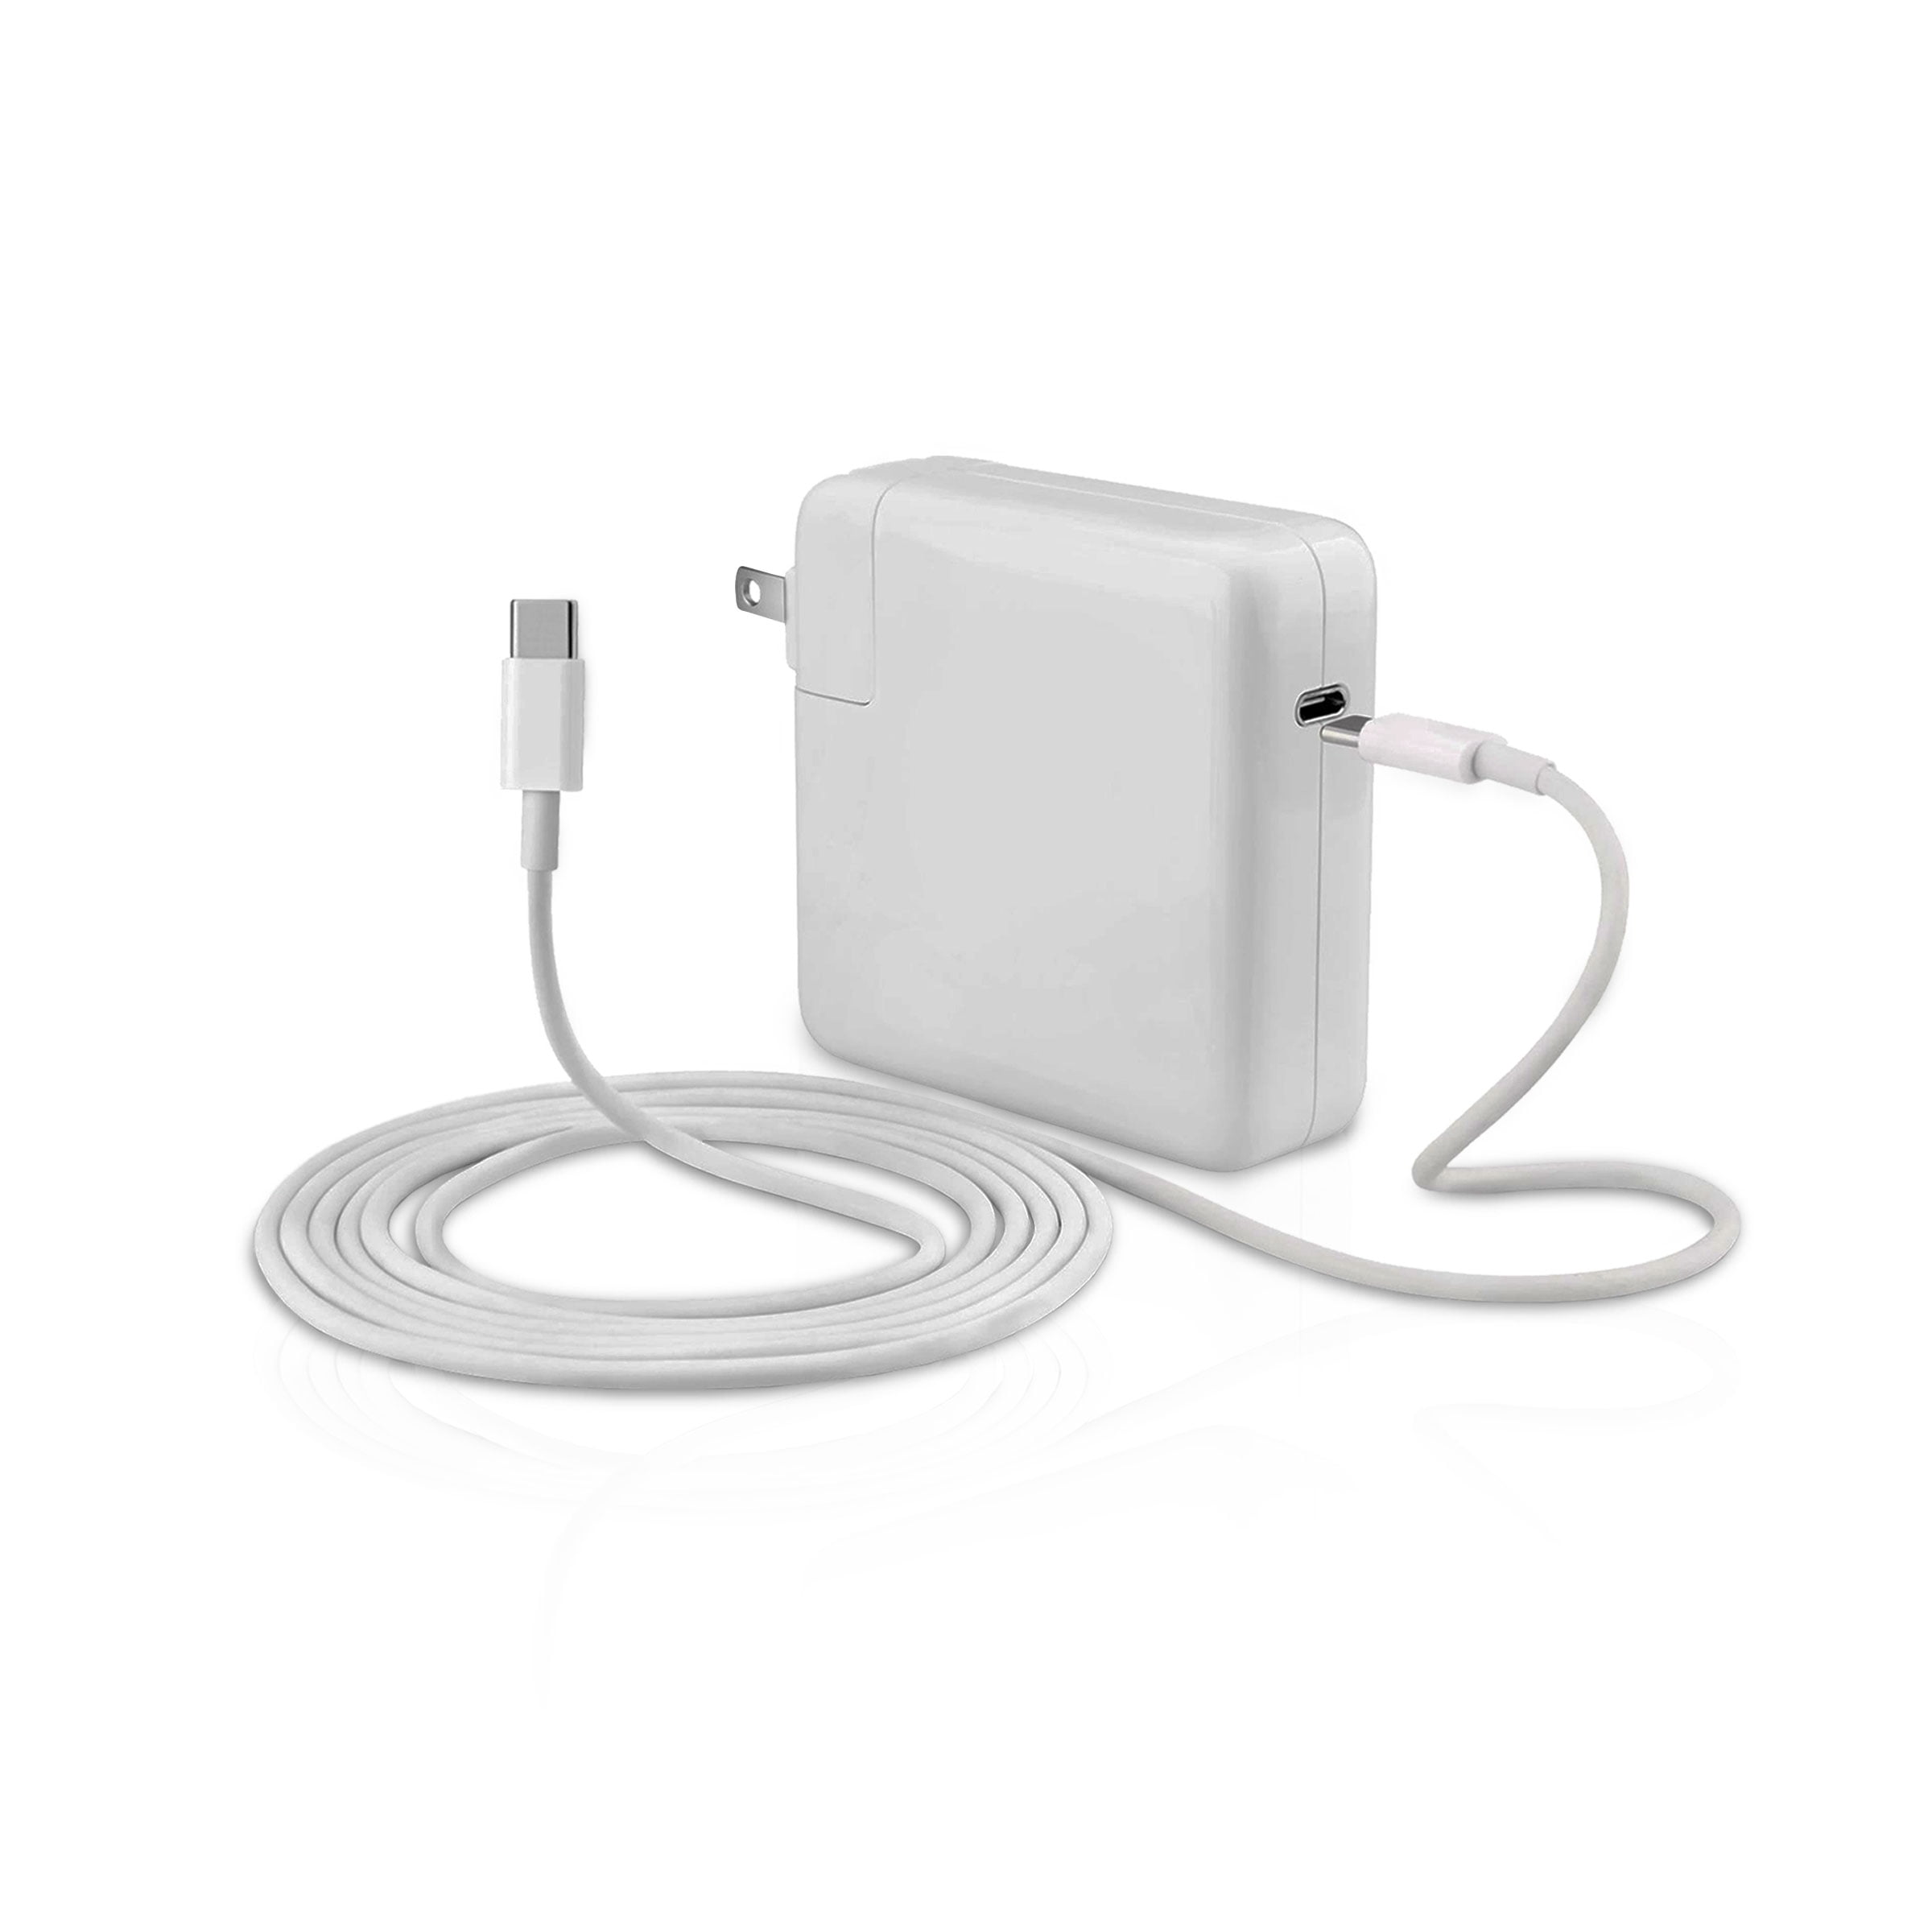 Laptop Charger for Mac Book Pro, 87W USB C Charger Power Adapter Compatible  with MacBook Pro 16, 15, 14, 13 Inch, MacBook Air 13 Inch, iPad Pro  2021/2020/2019/2018, Included 7.2ft USB C to C Cable 